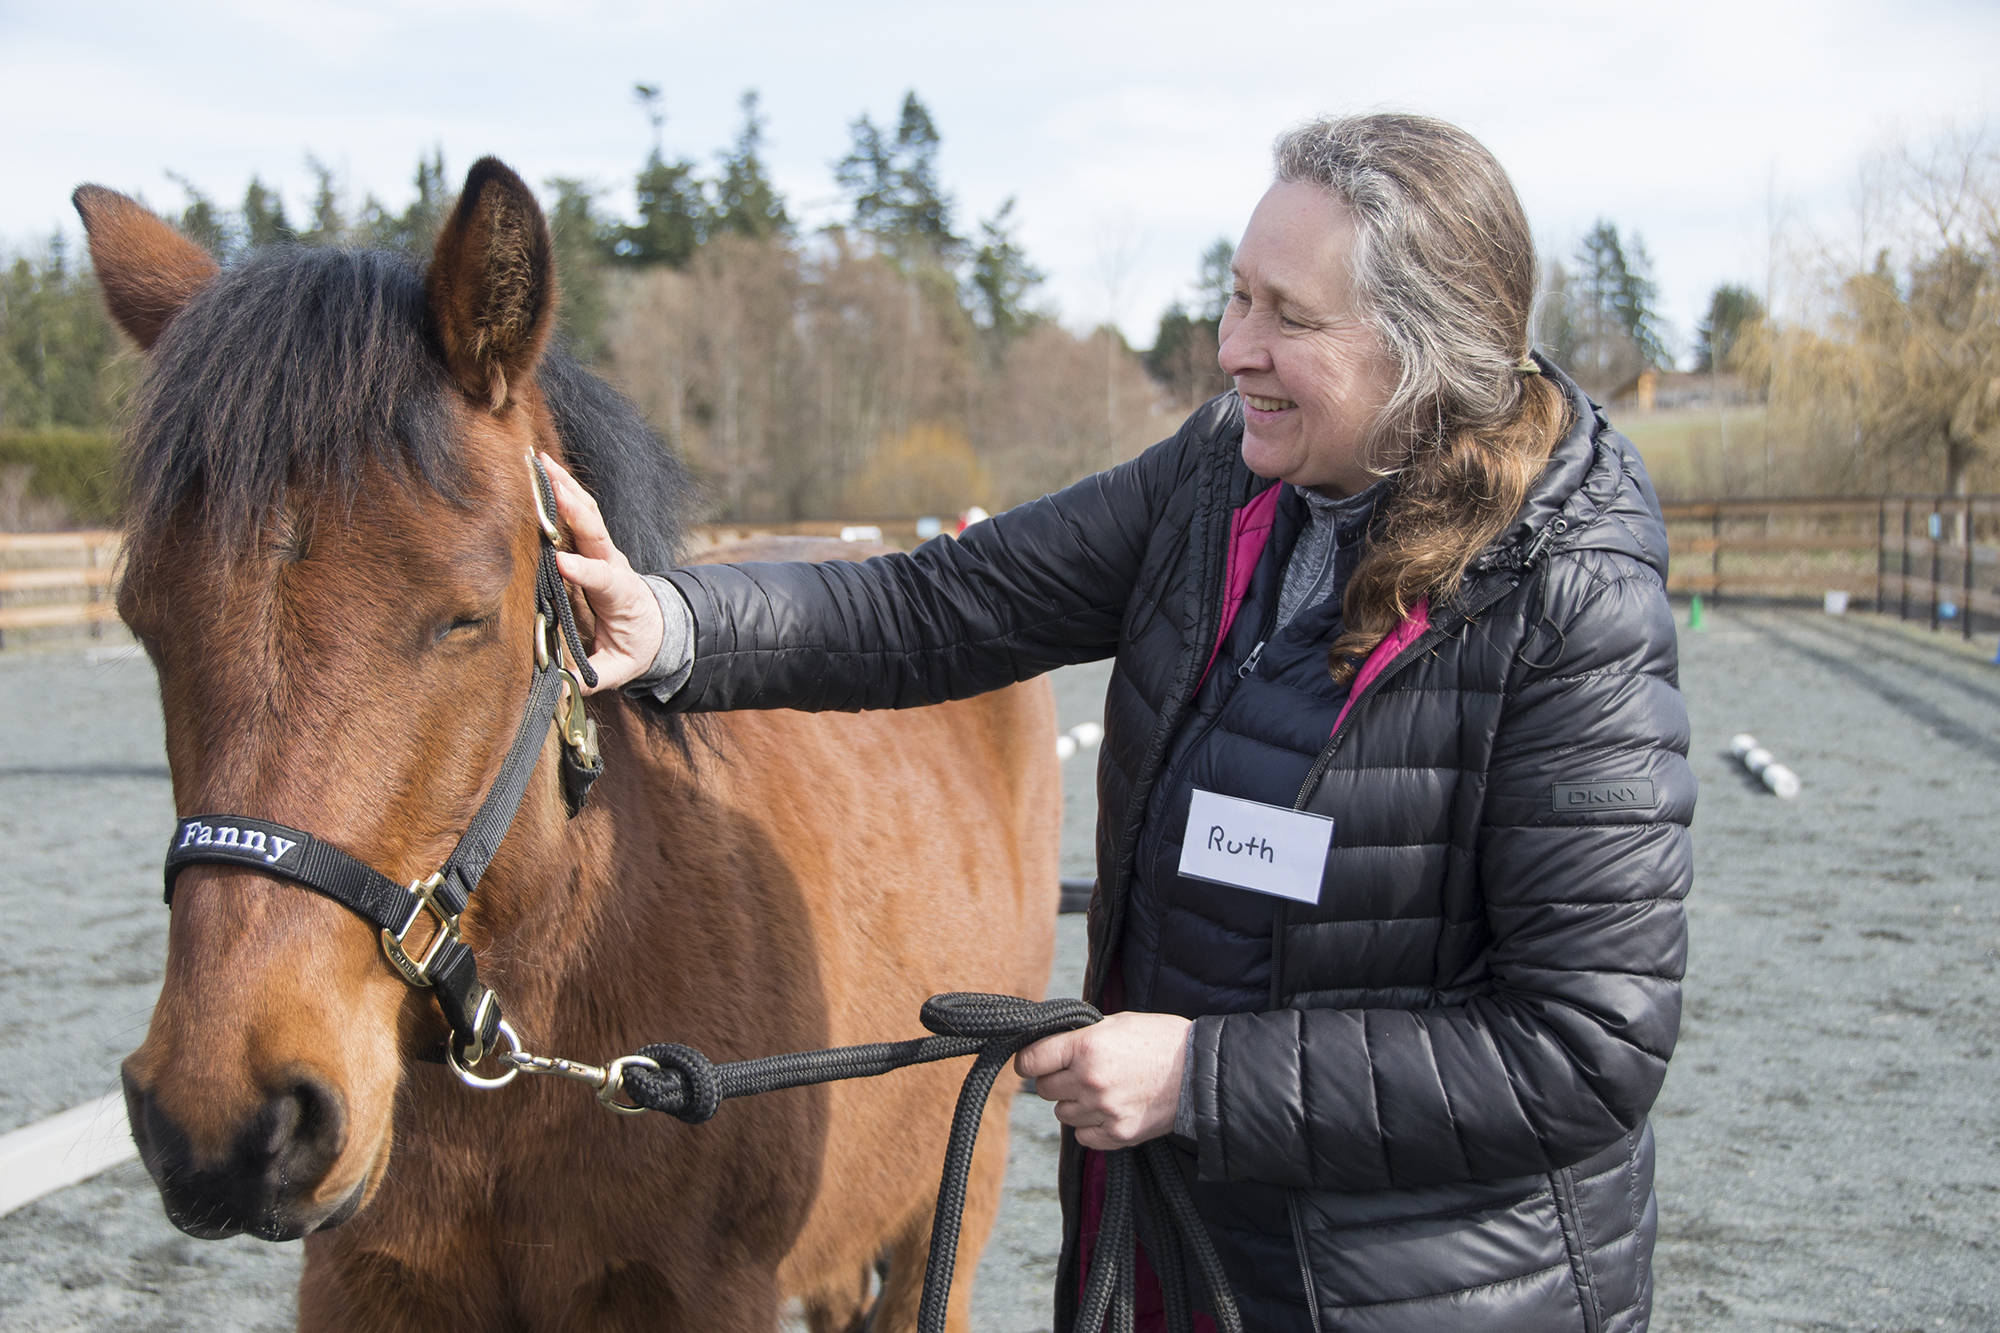 Ruth Bartesko gives some love to Fanny the Shetland pony during an Equine Assisted Learning session at Heart Lake Farm on March 8. Bartesko is one of several participants from the Victoria Brain Injury Society to take part in the new program. (Nina Grossman/News Staff)
Ruth Bartesko gives some love to Fanny the Shetland pony during an Equine Assisted Learning session at Heart Lake Farm March 8. Bartesko is one of several participants from the Victoria Brain Injury Society to take part in the new program. (Nina Grossman/News Staff)